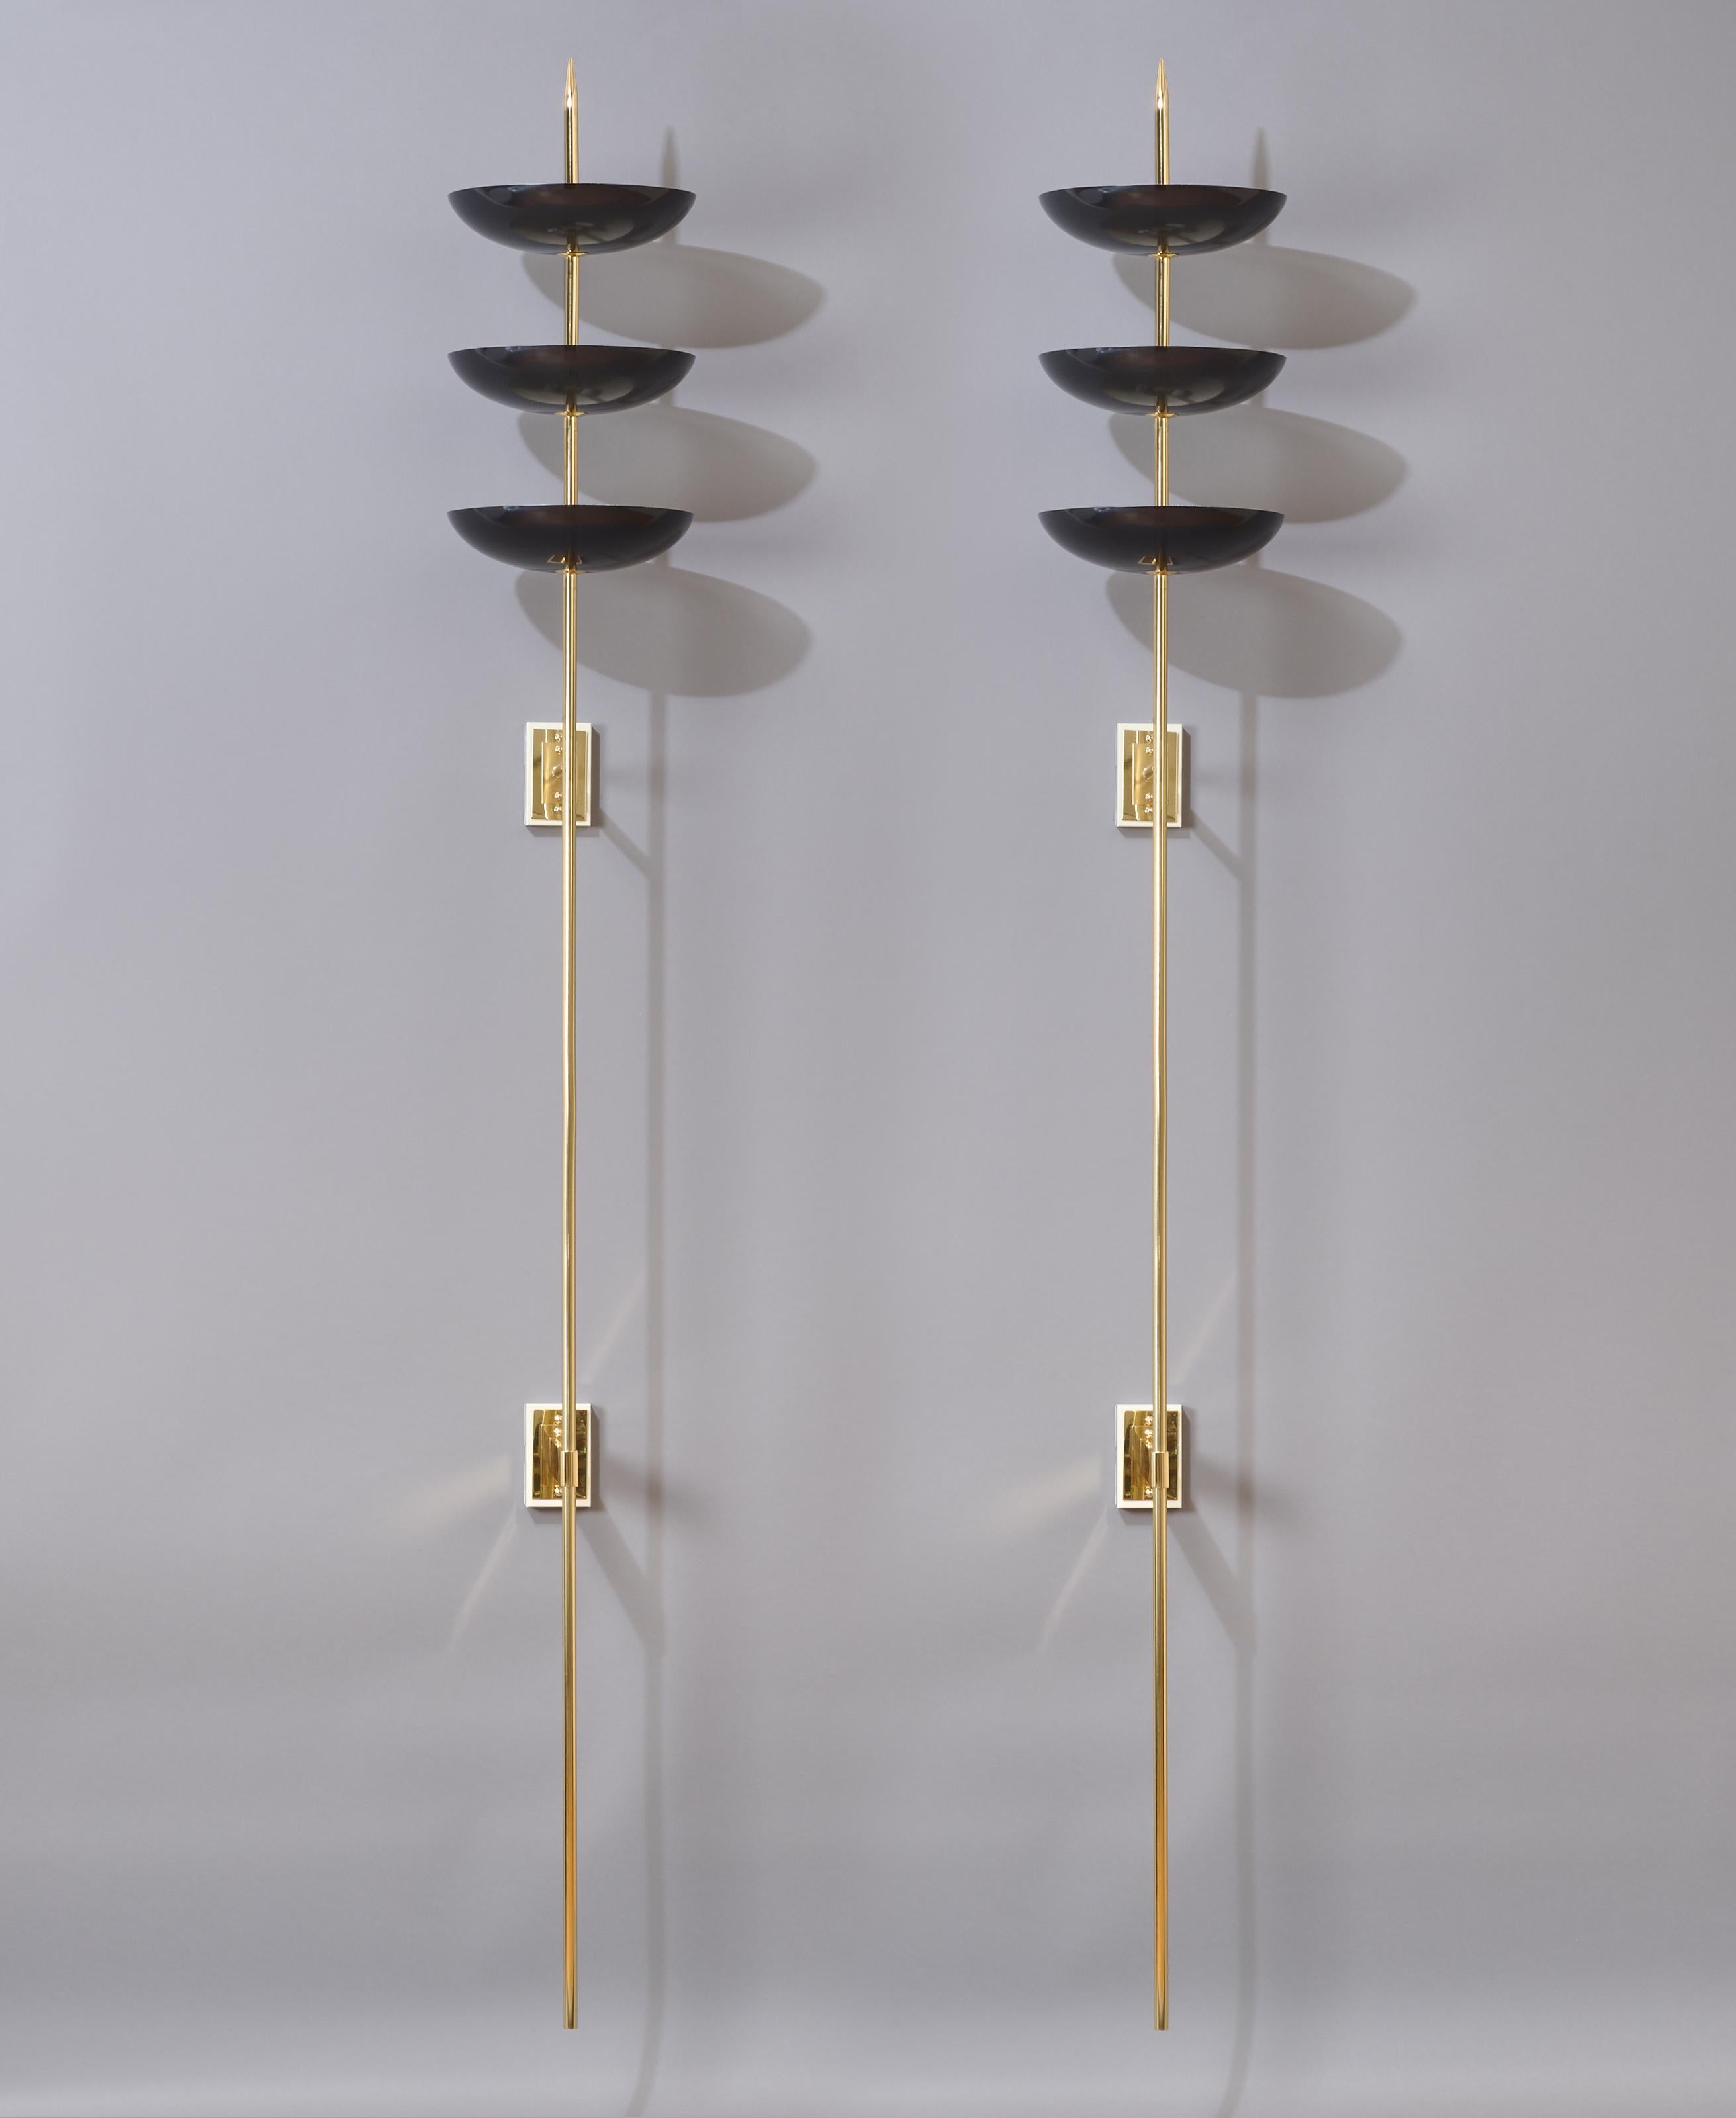 Stilnovo, Massive Pair of Three Bowl Sconces in Brass and Enamel, Italy, 1950s For Sale 10